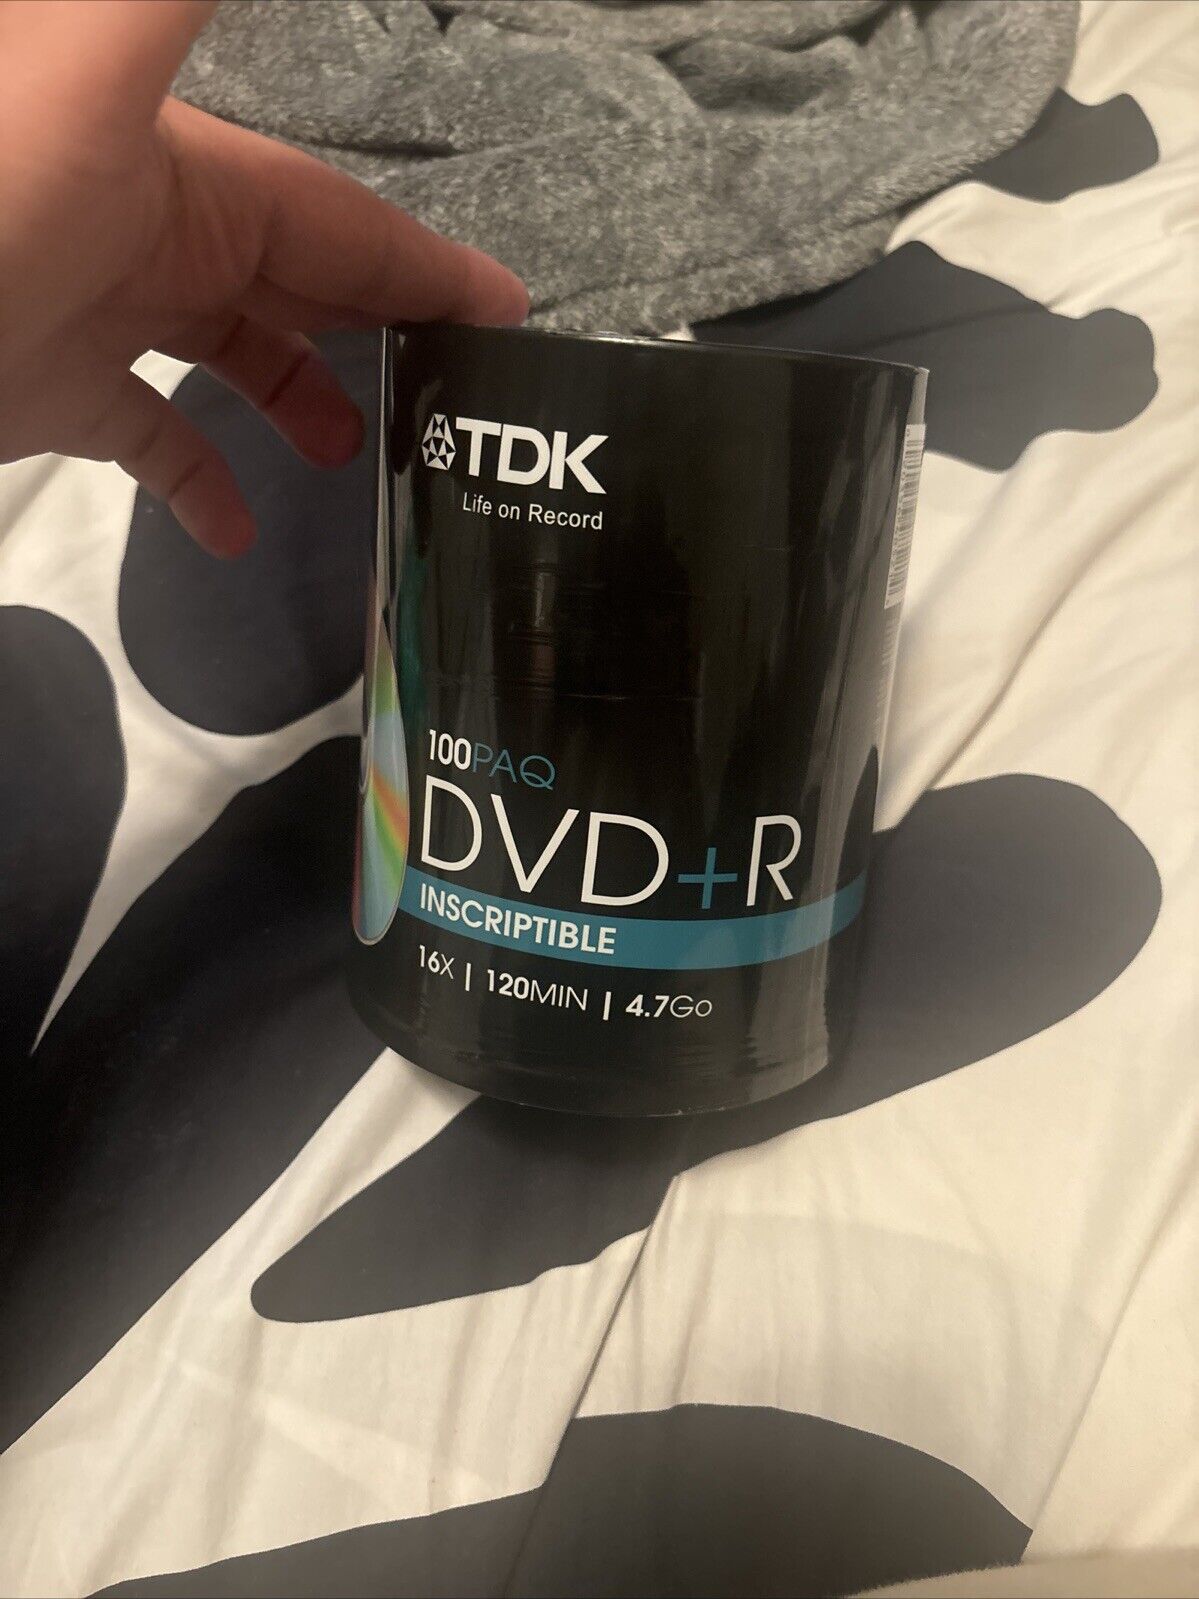 TDK DVD + R Recordable 1-16x 4.7GB 100 PACK - Spindle DVD+R Inscriptible 120min